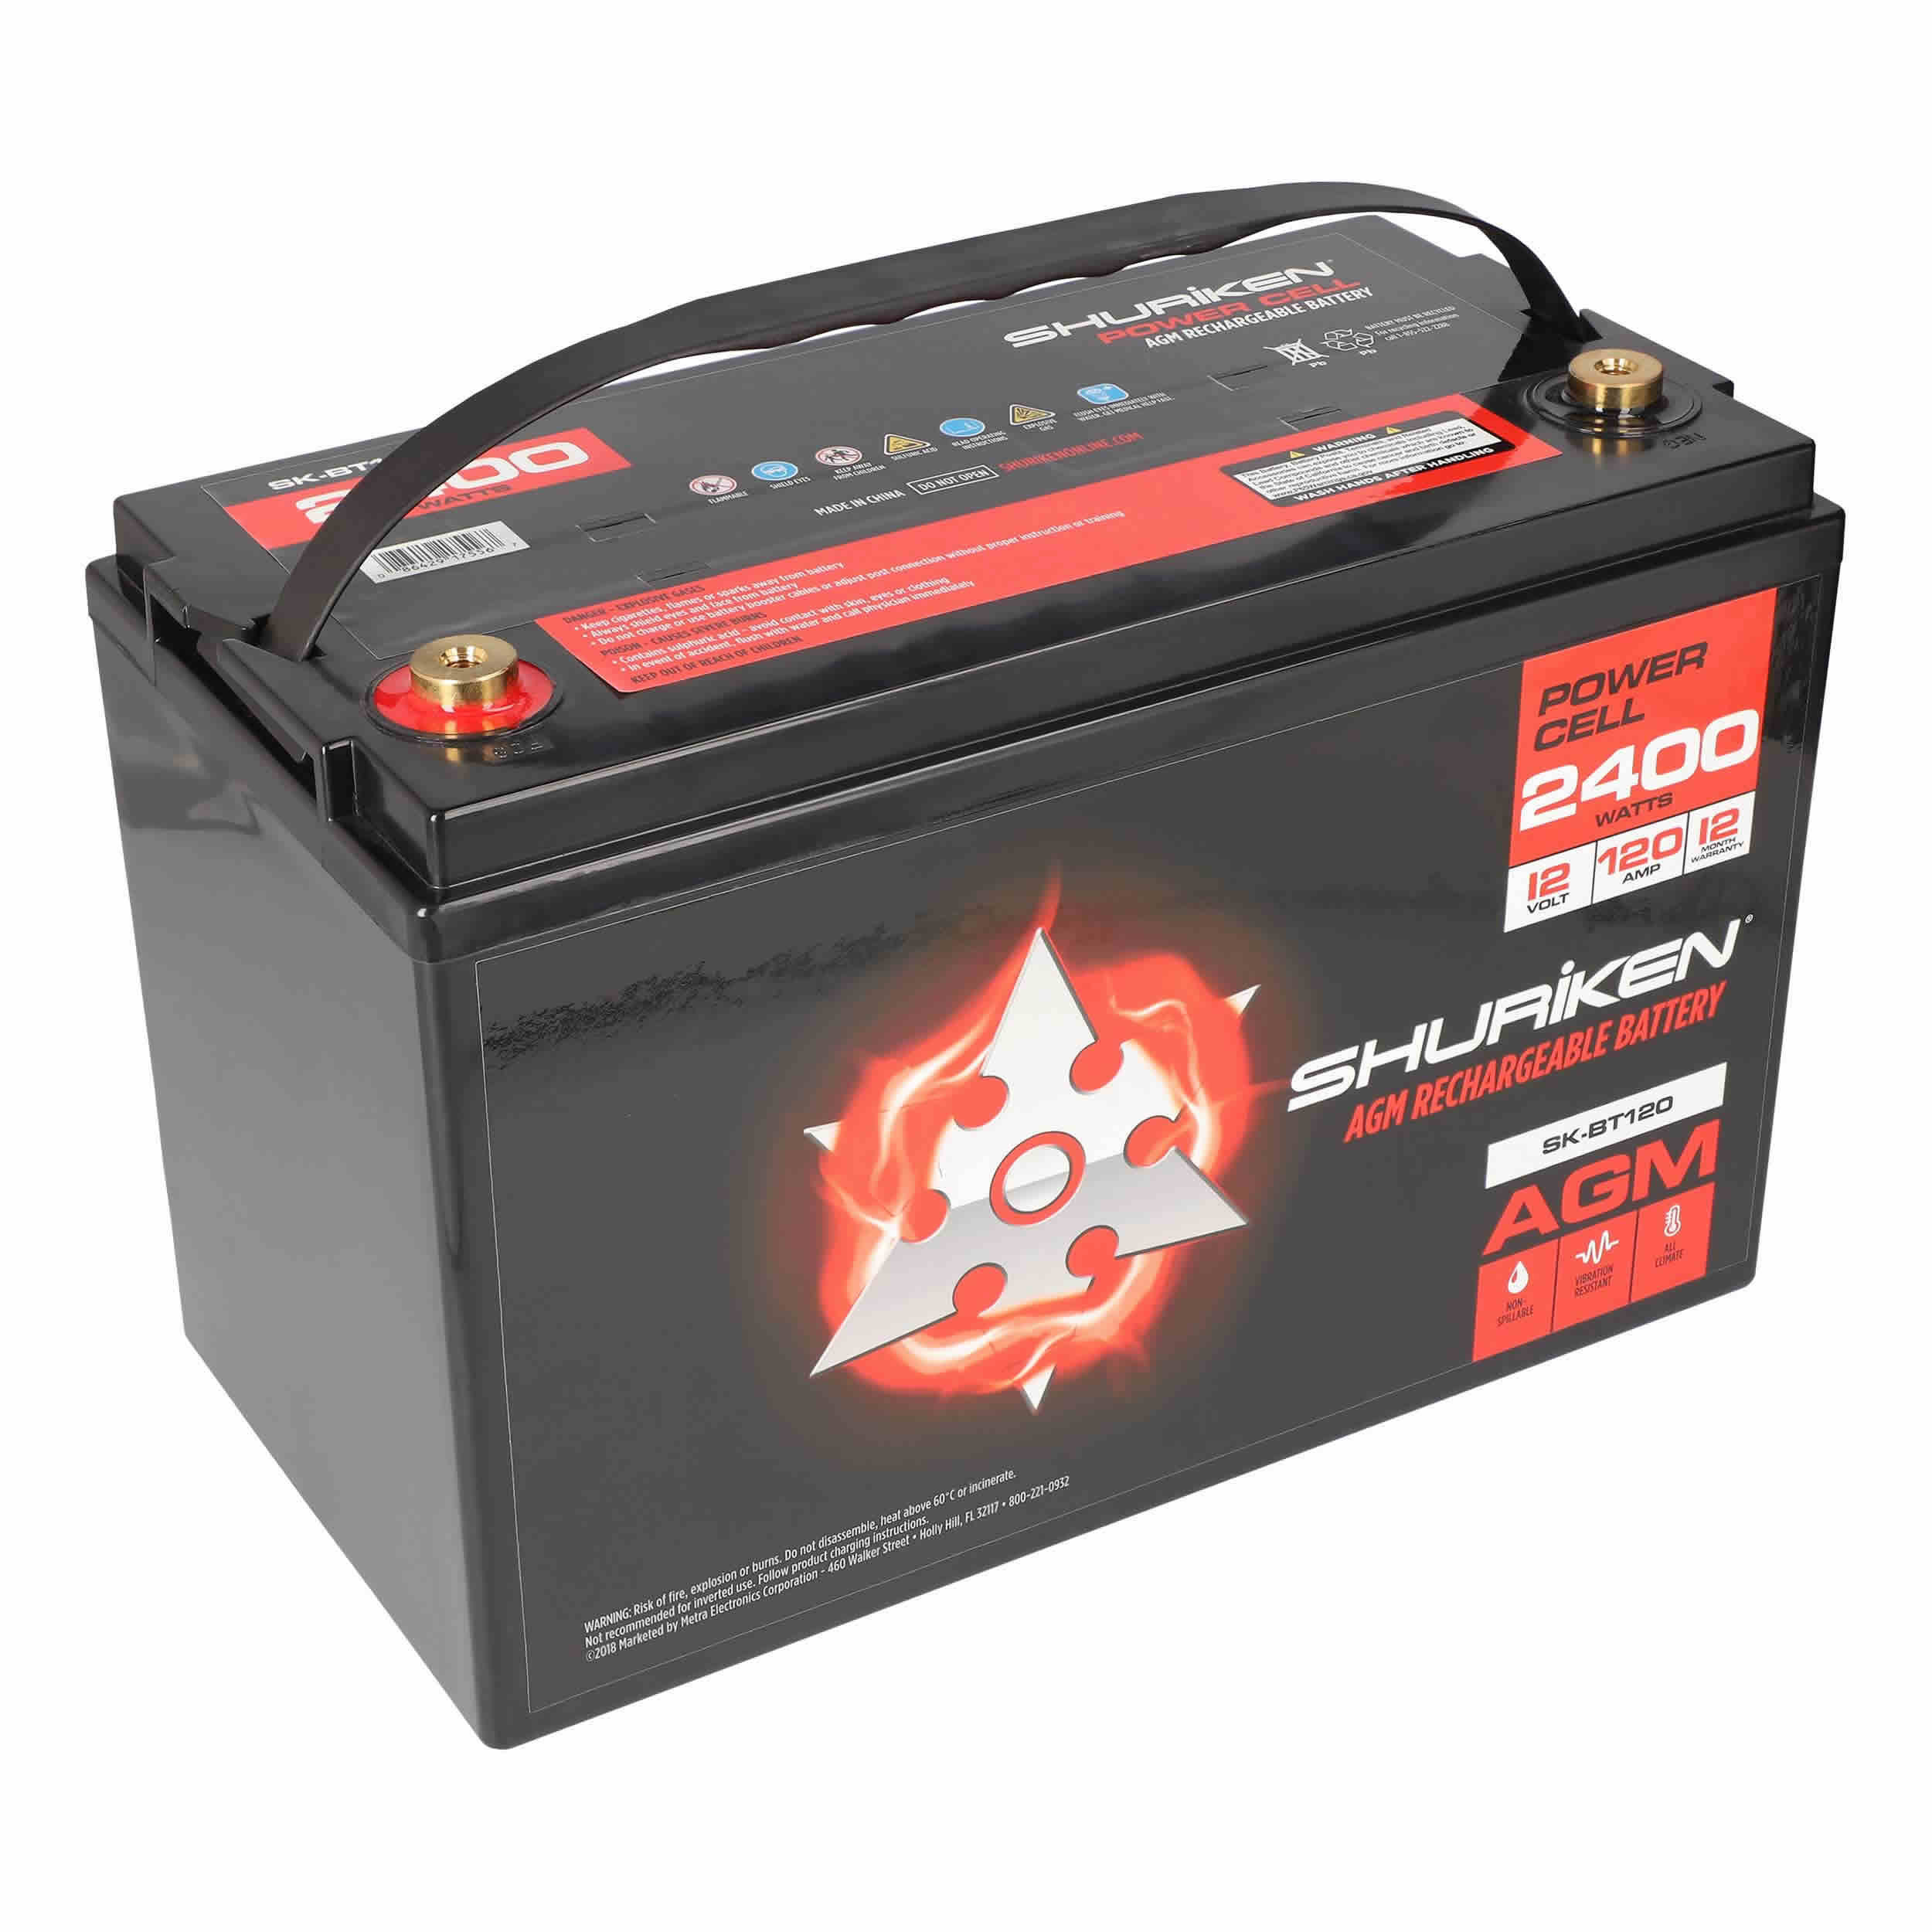 2400W 120AMP Hours Large Size AGM 12V Battery